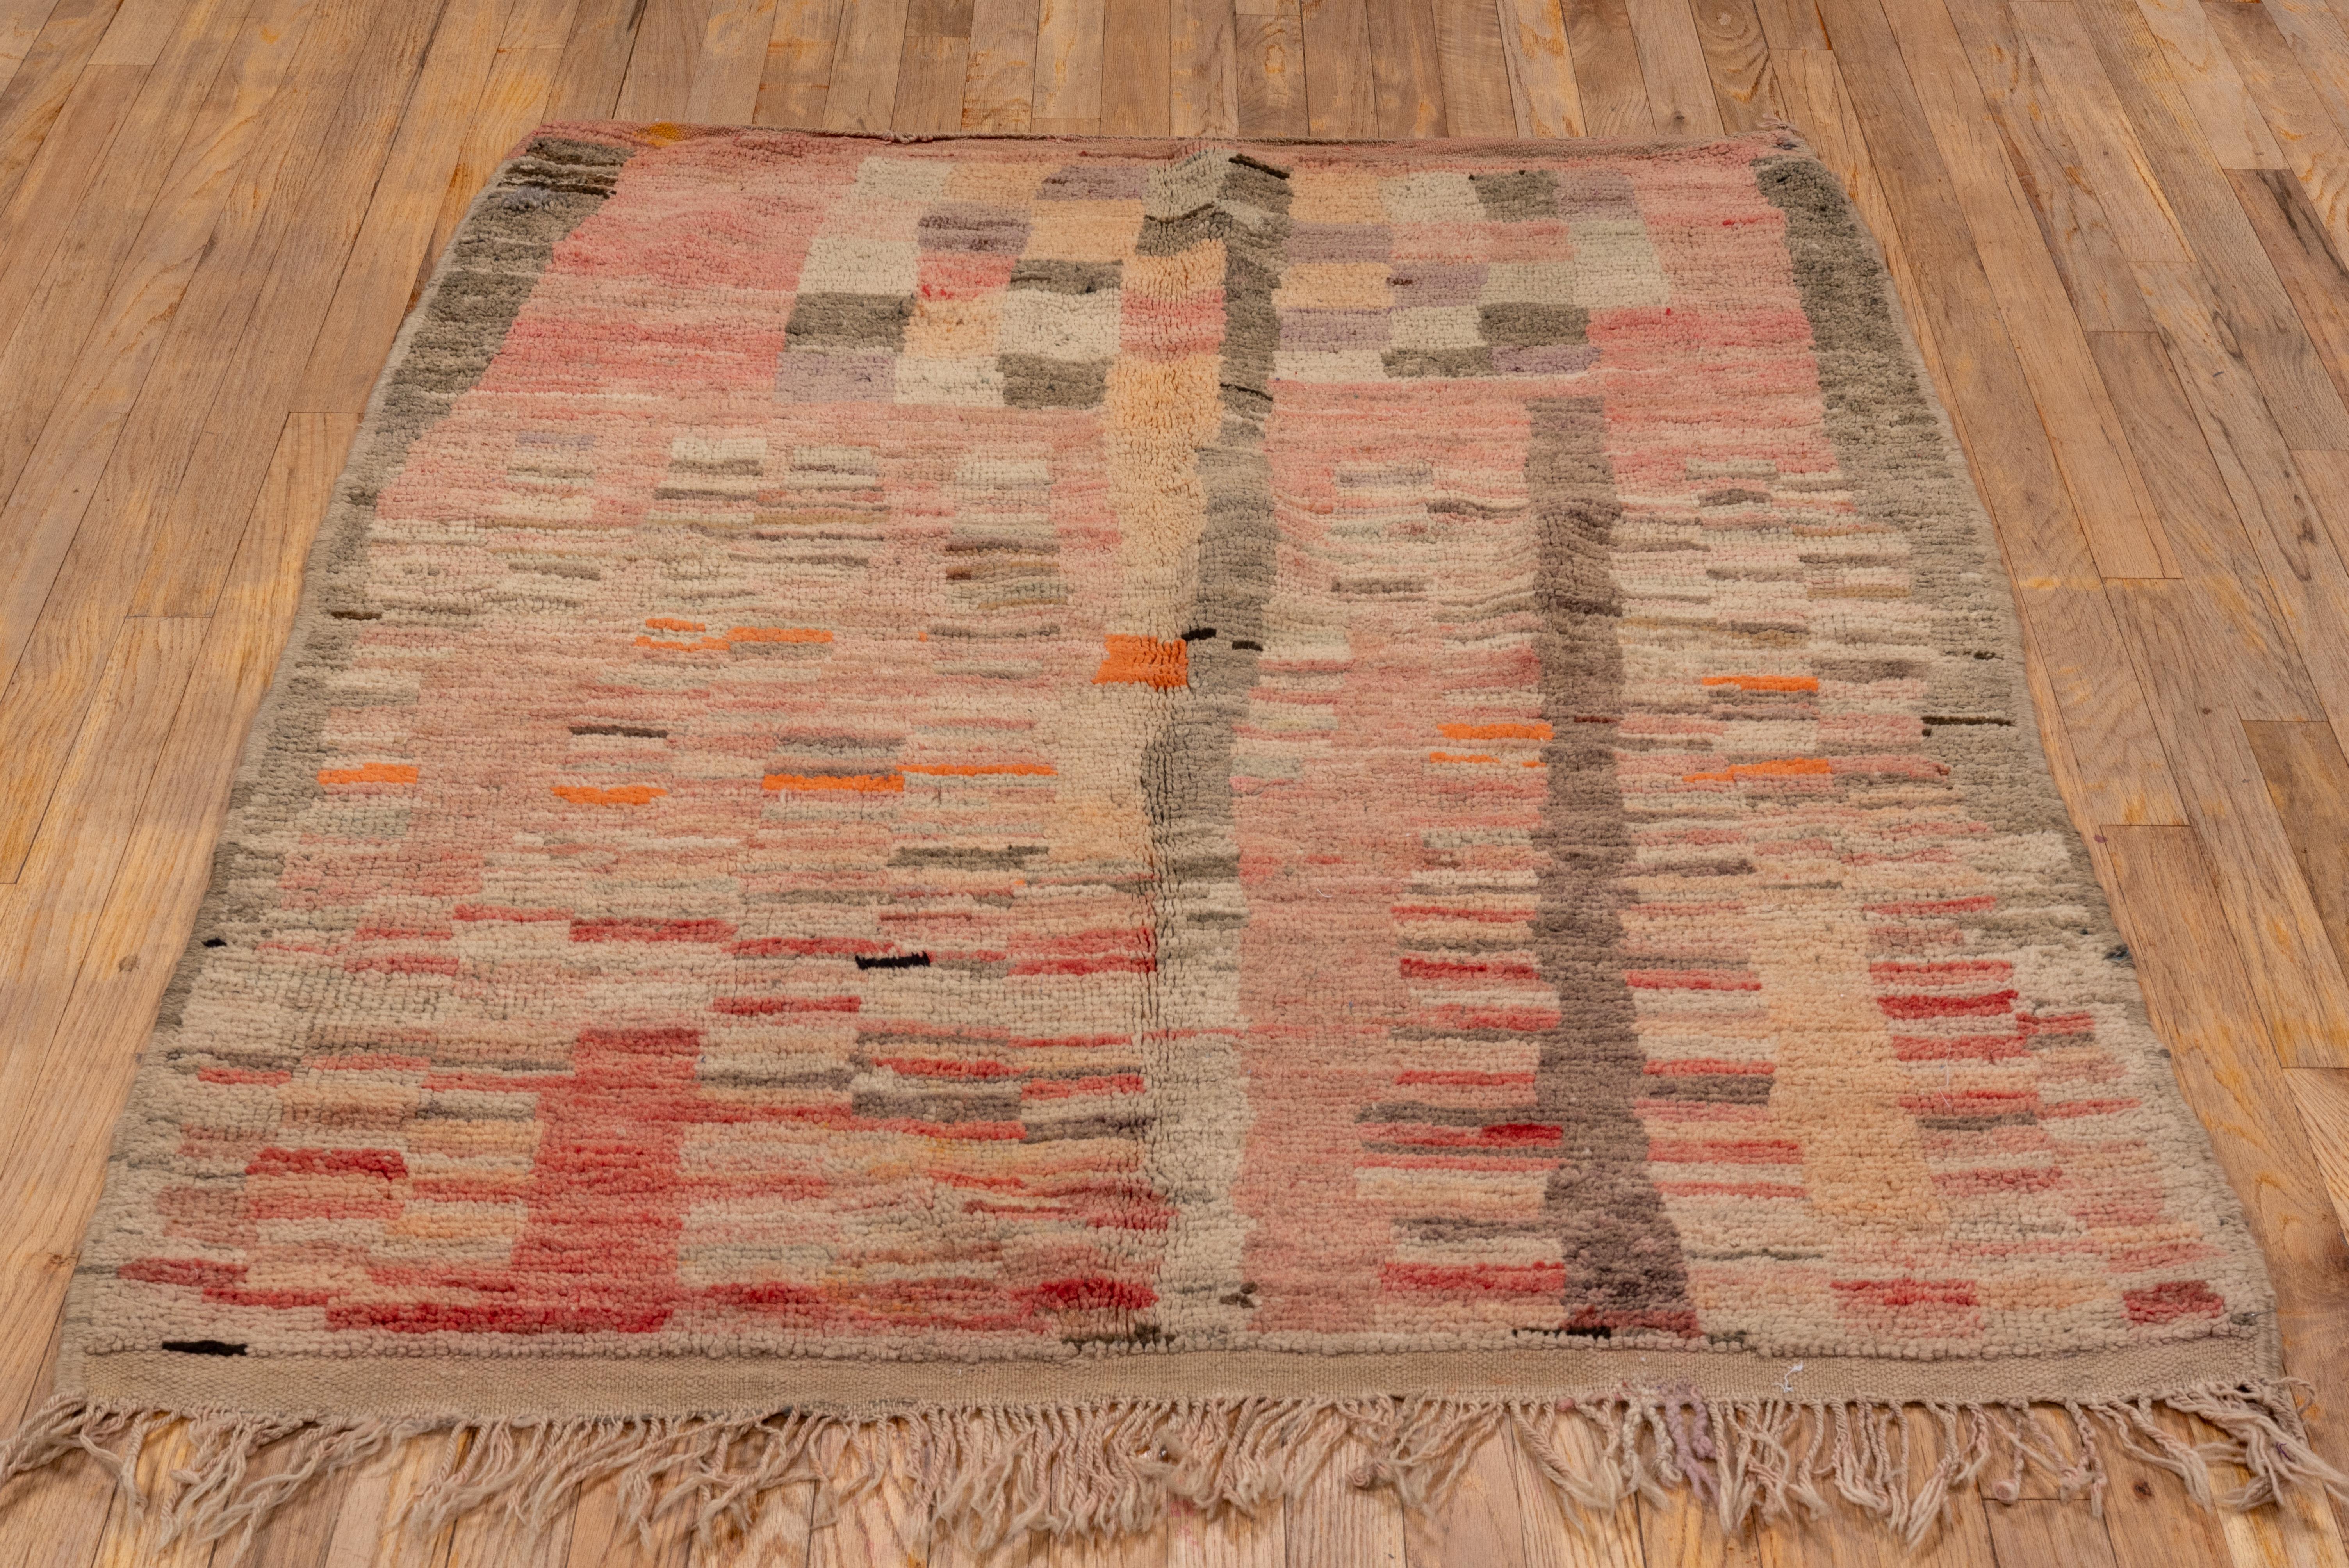 Tribal Rustic Moroccan Scatter Rug, Red & Coral Palette, Circa 1970s For Sale